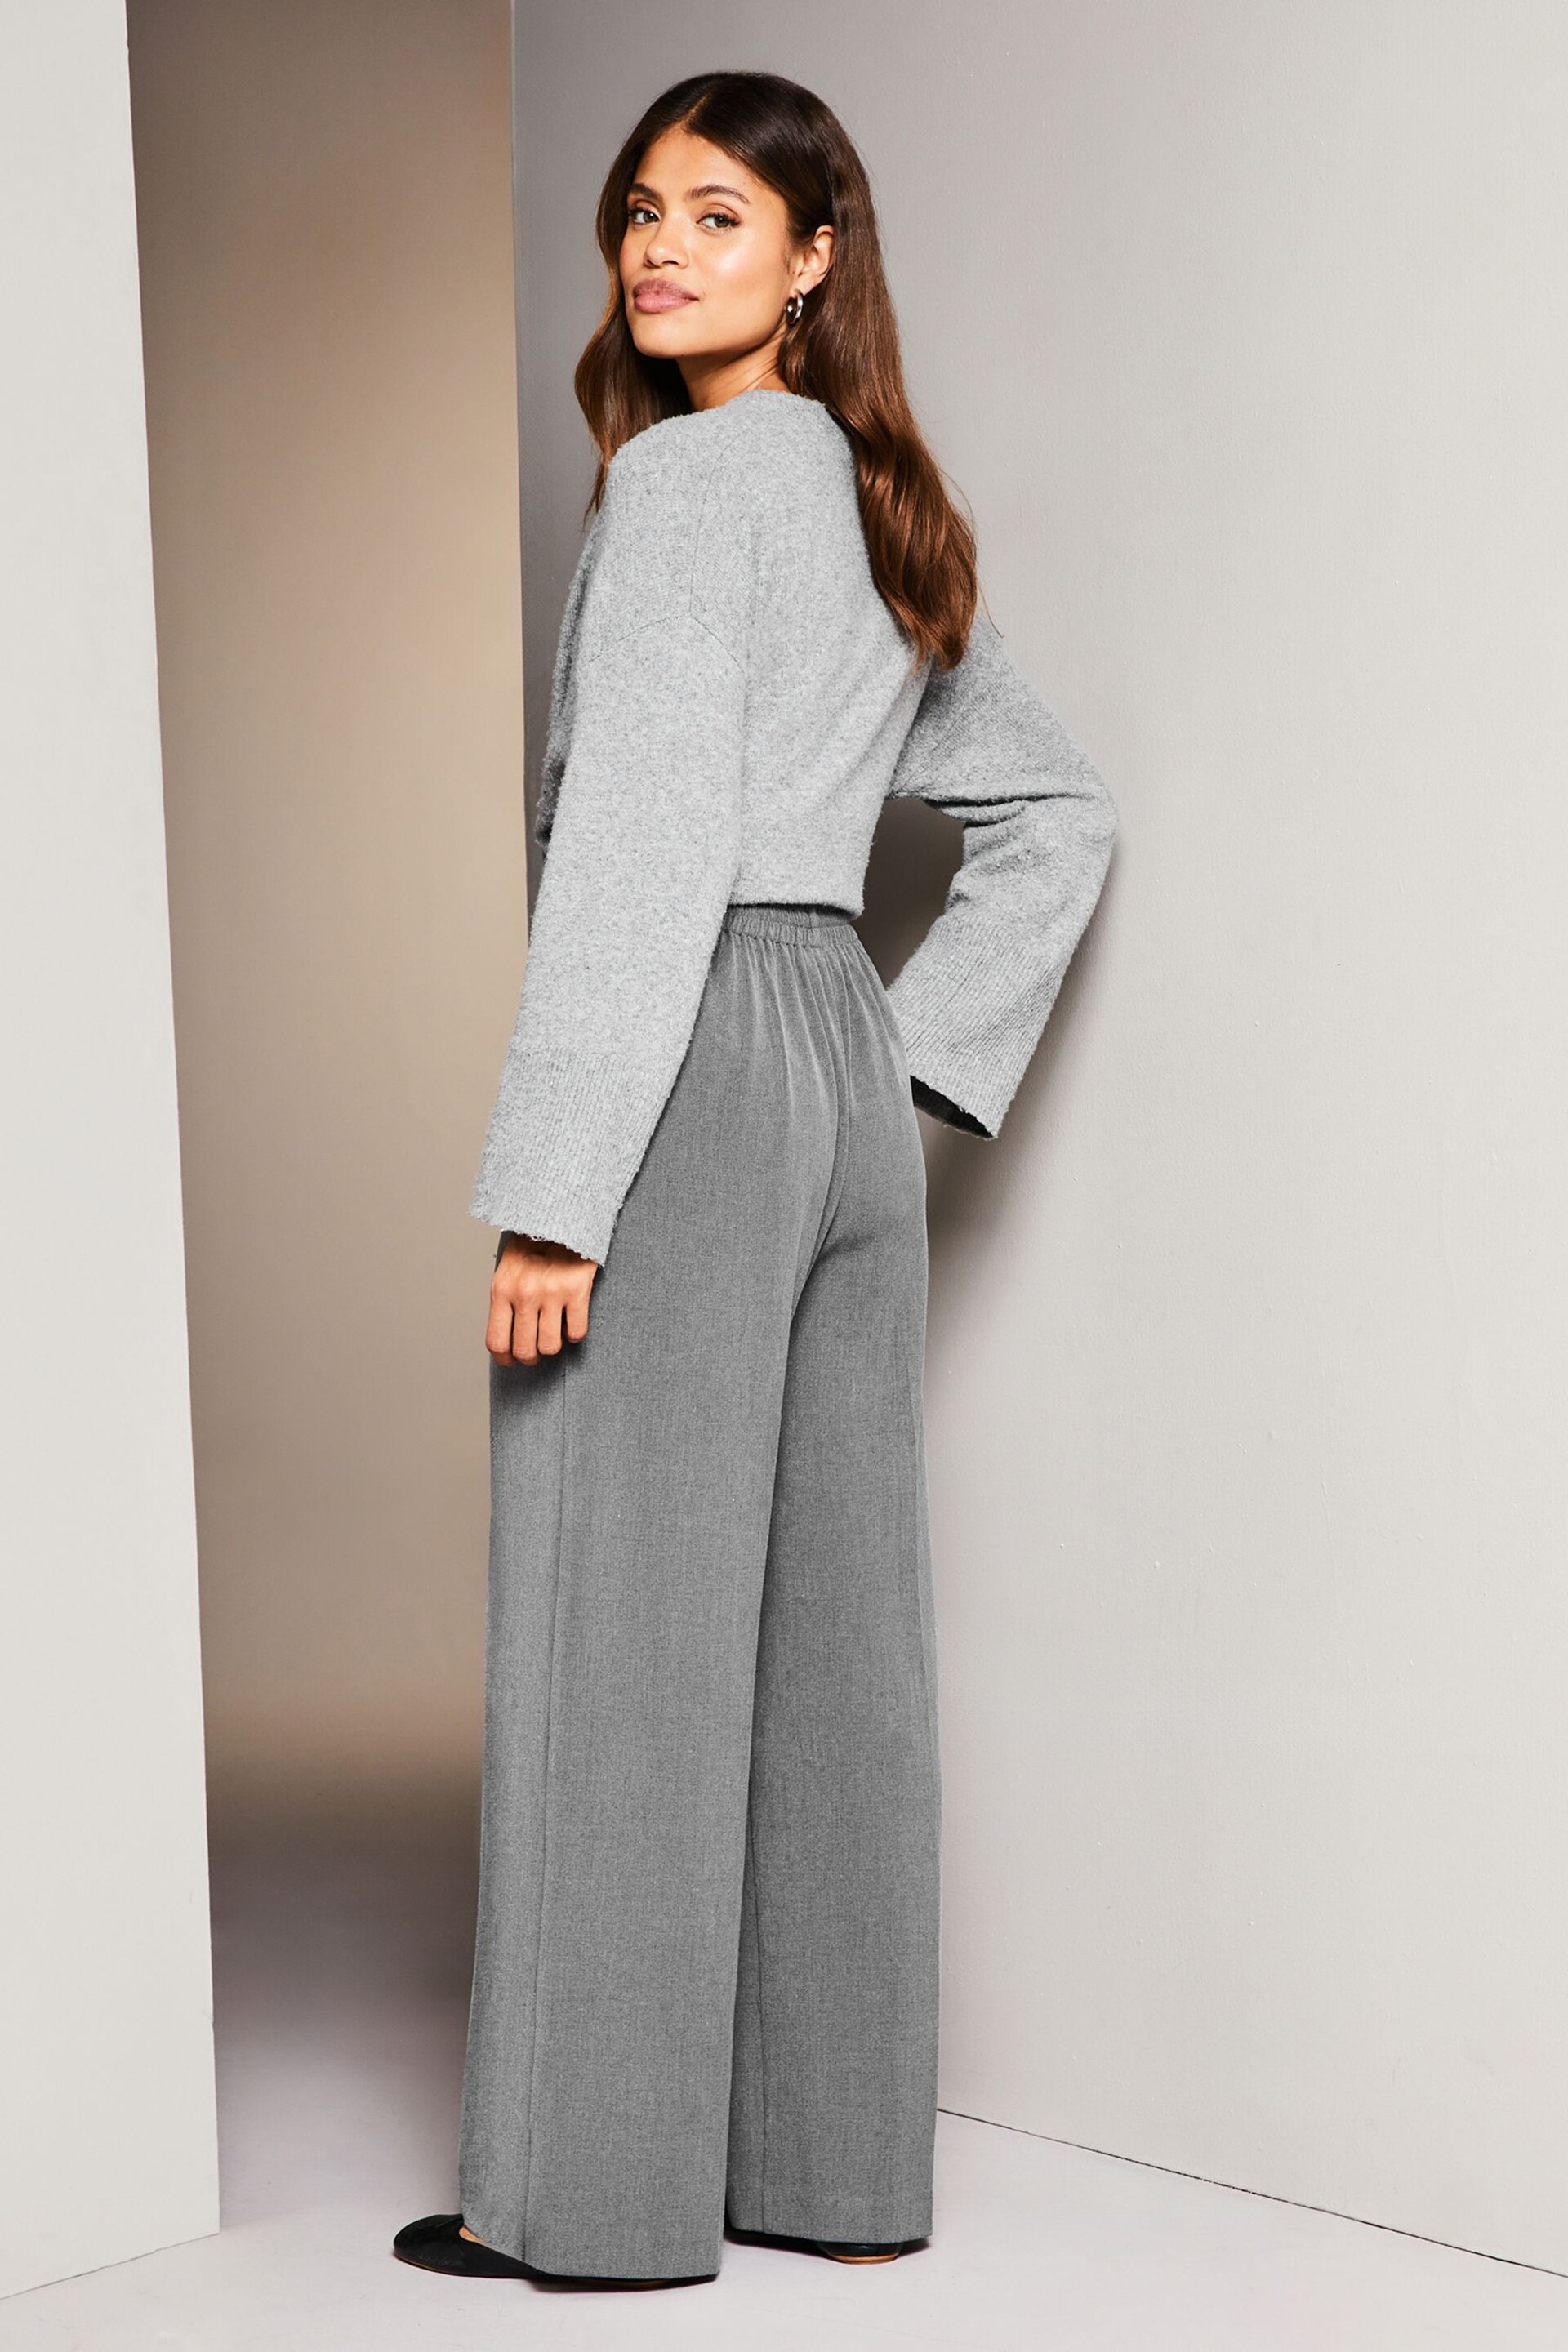 Lipsy Grey Petite Wide Leg Tailored Trousers - Image 2 of 4